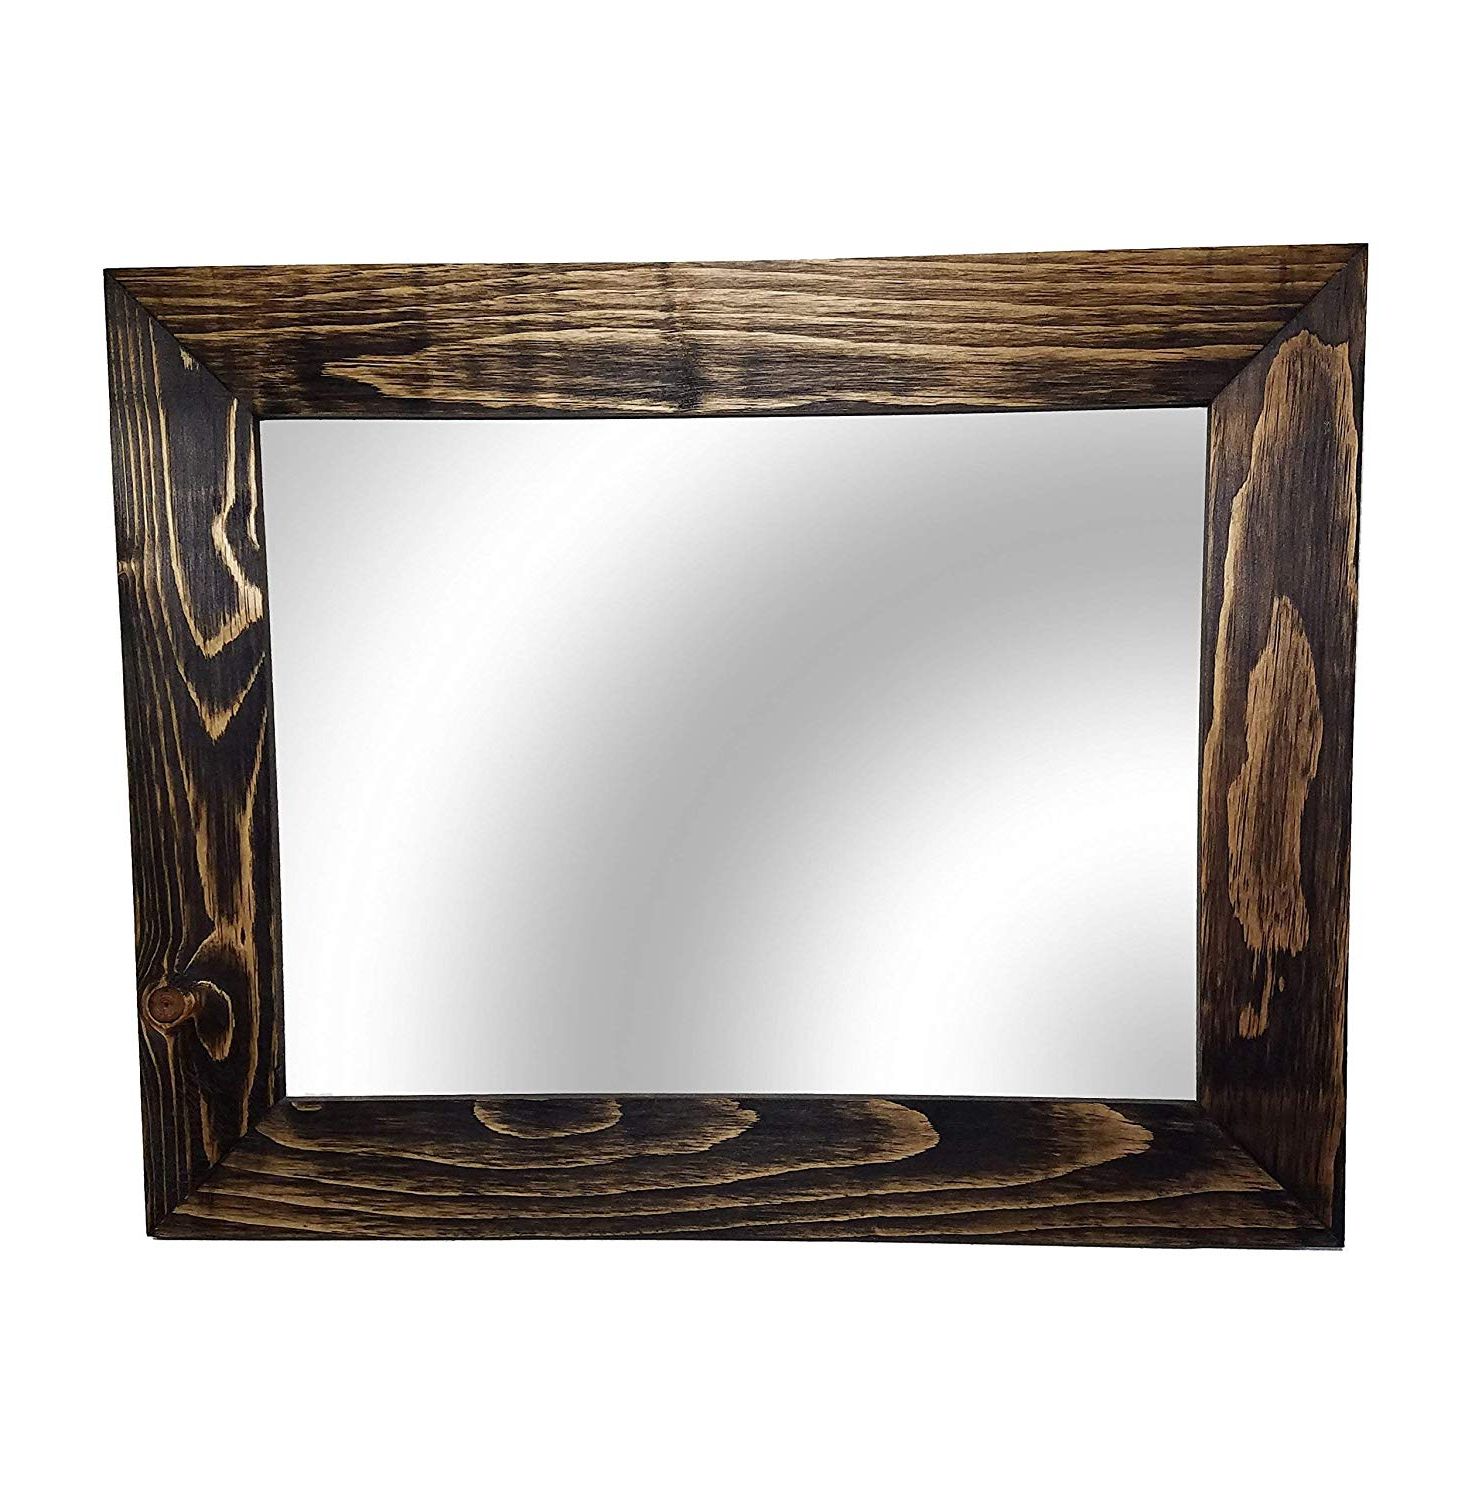 Fashionable Shiplap Large Wood Framed Mirror Available In 4 Sizes And 20 Colors: Shown  In Dark Walnut Stain – Large Wall Mirror – Rustic Barnwood Style – Intended For Wooden Framed Wall Mirrors (Photo 14 of 20)